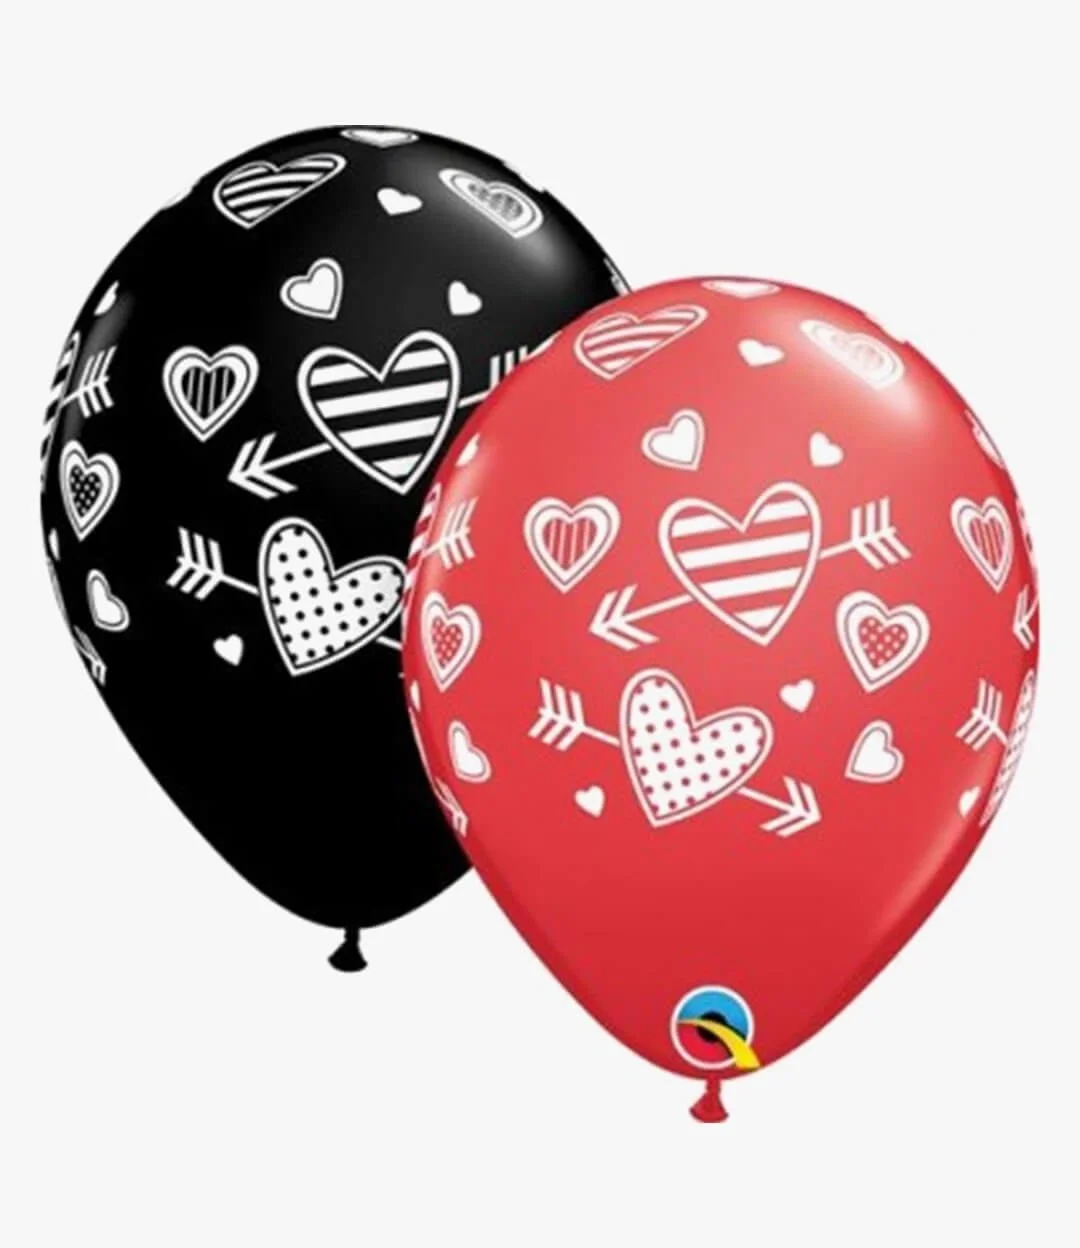 Red & Black Helium Balloons with Heart Prints 